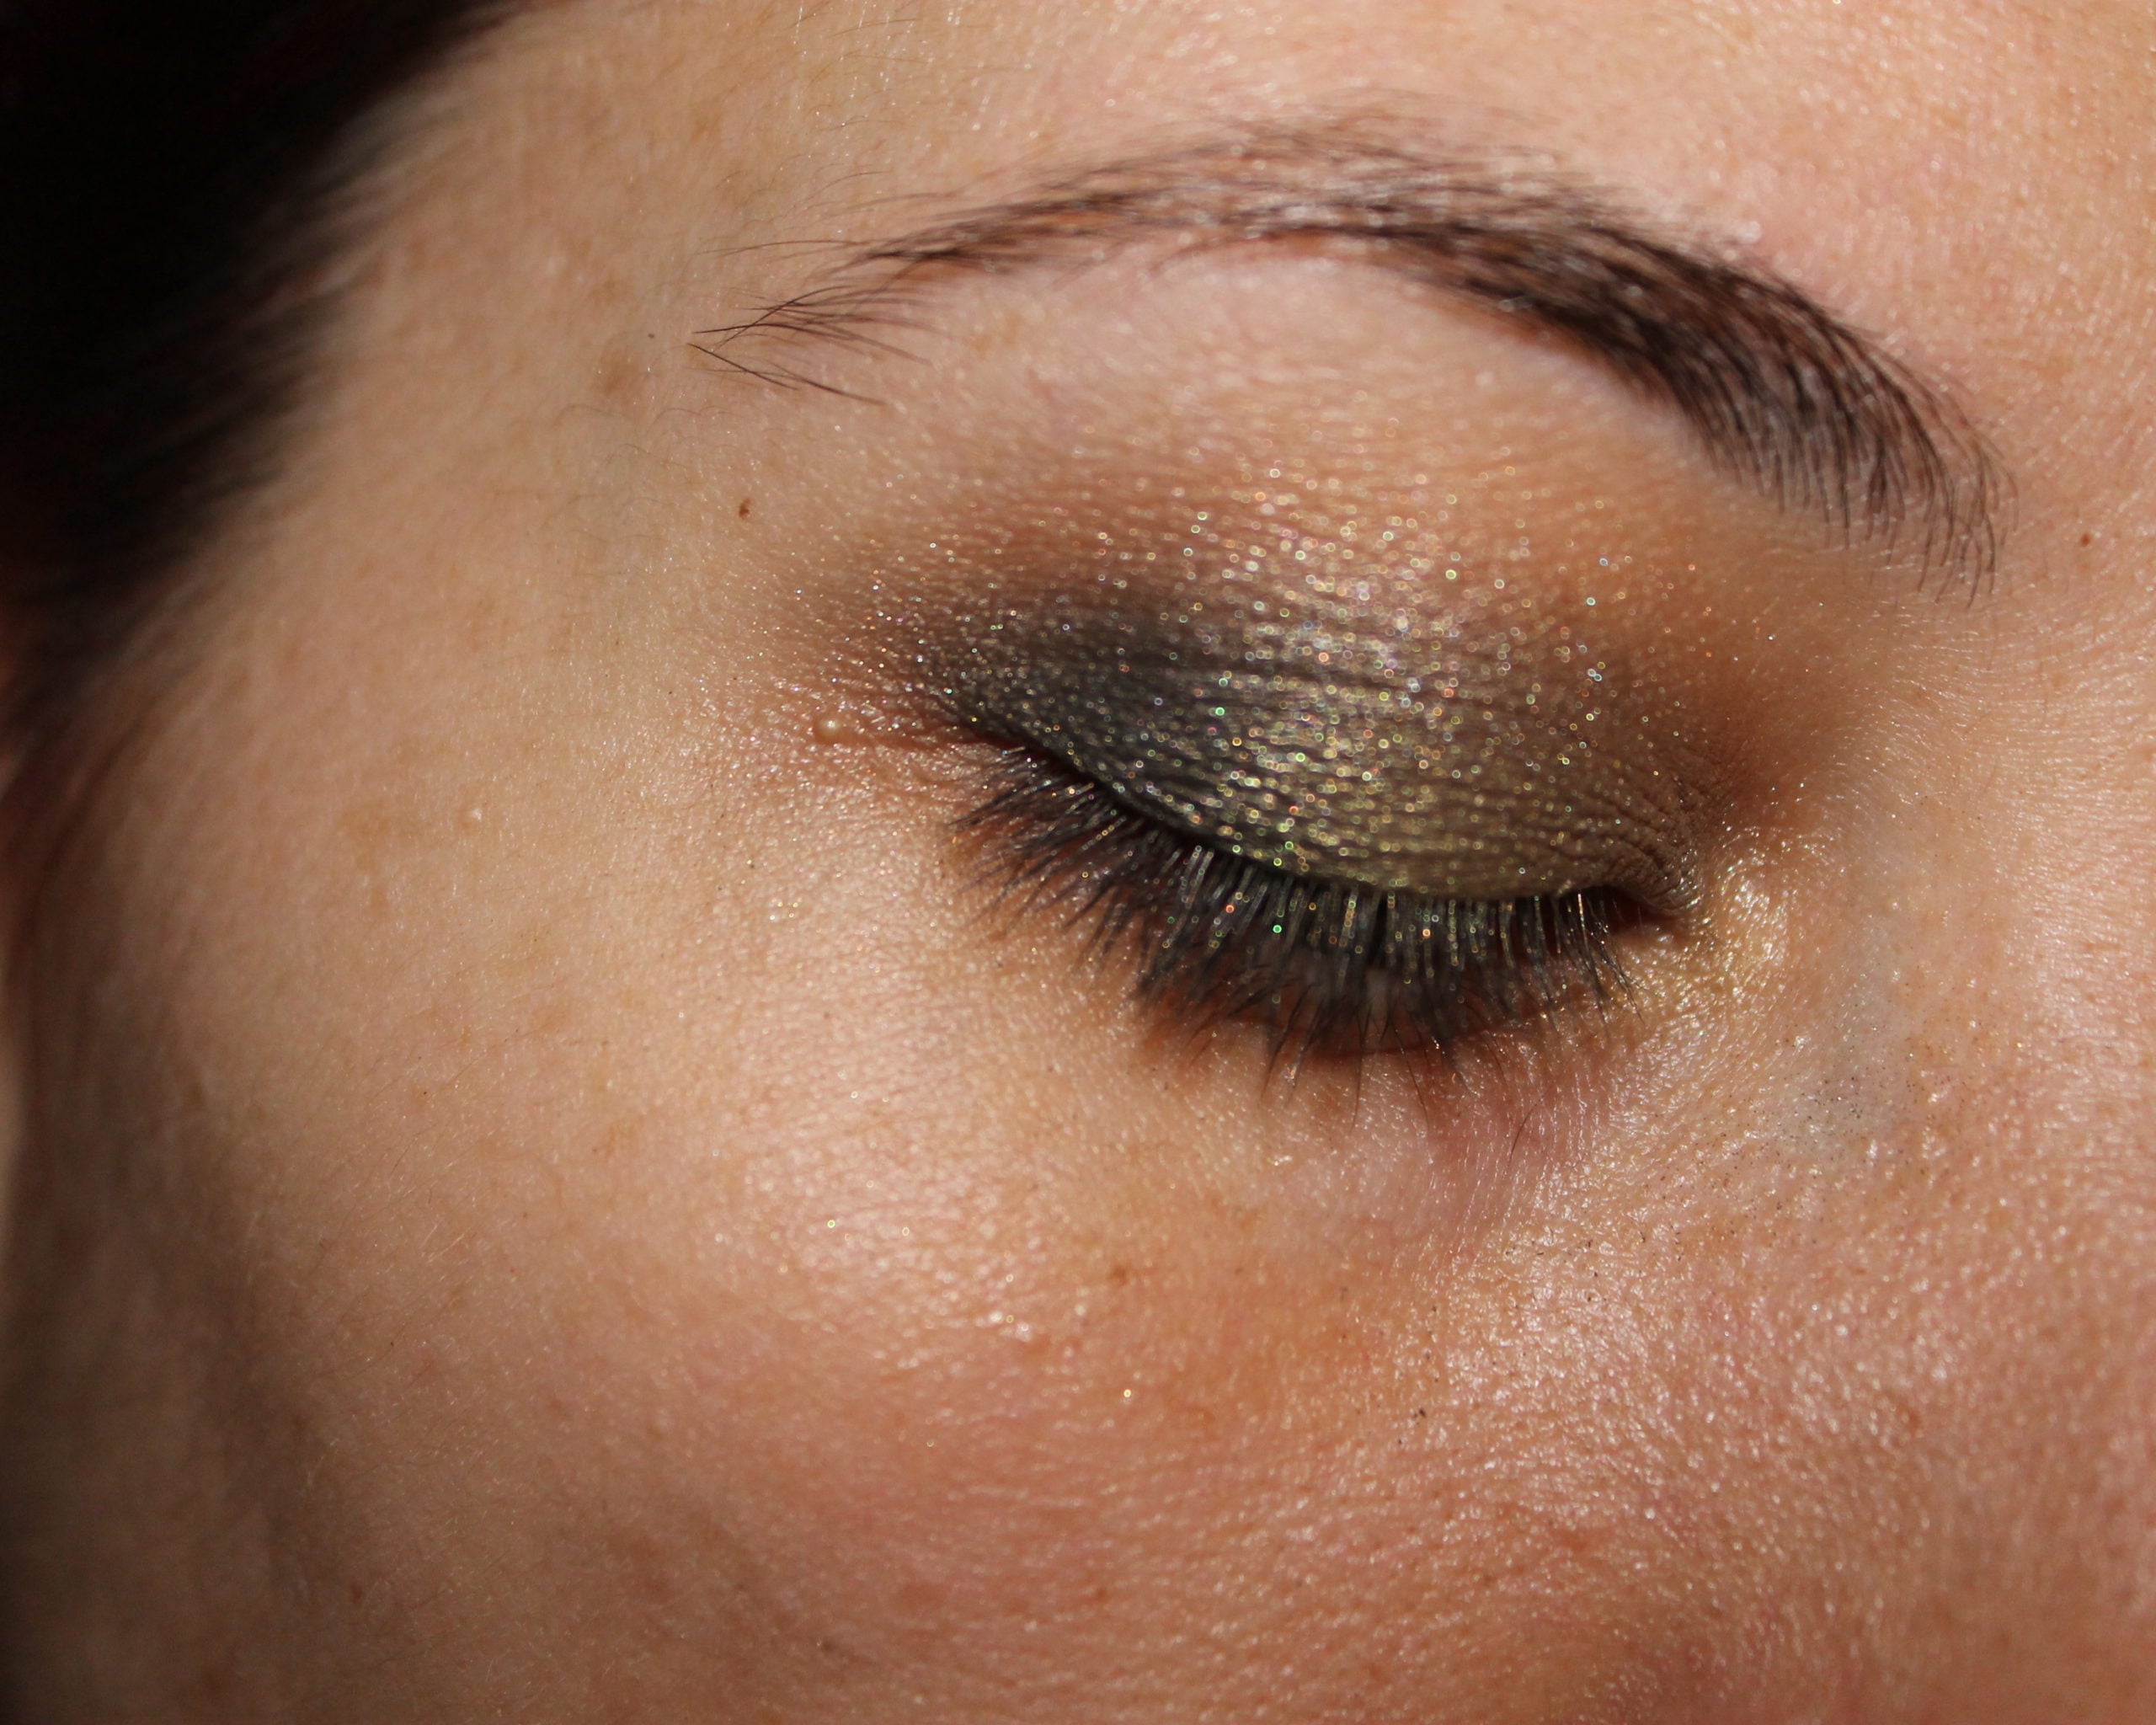 Trend: How To Get The Makeup Look: Show Some Irish Pride With A St. Patrick's Day Smoky Green Eye